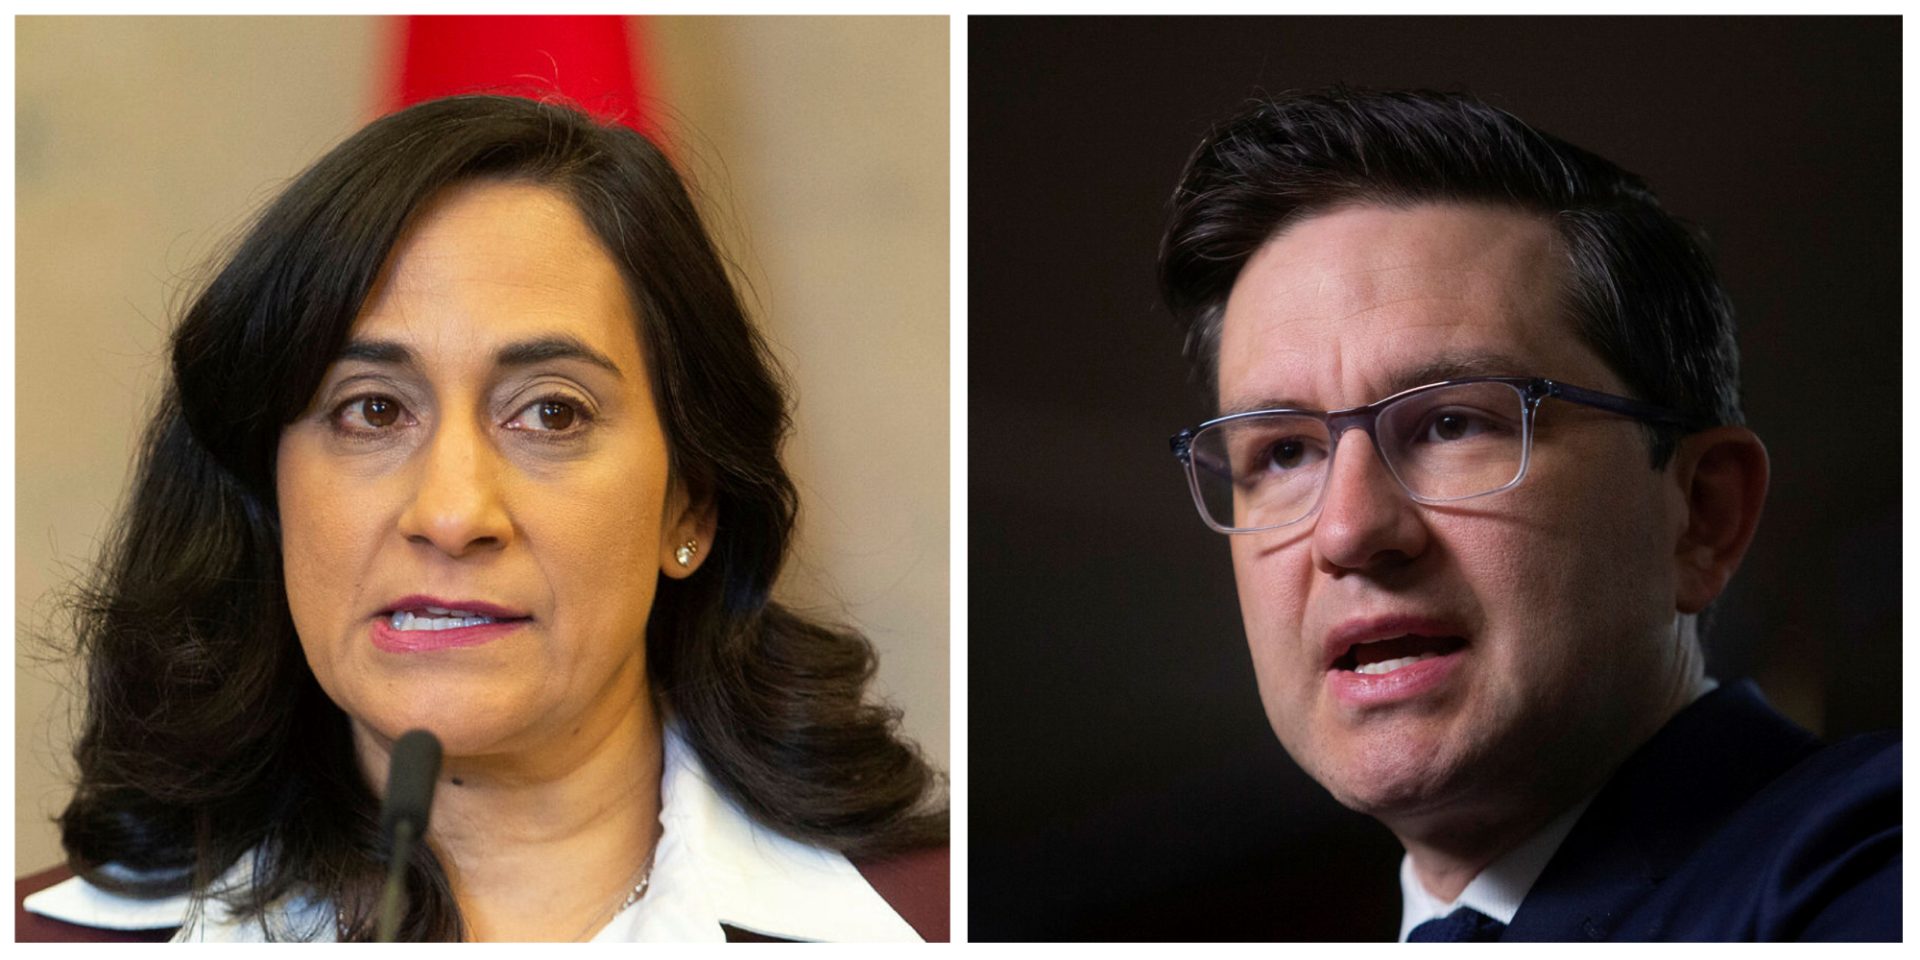 On Jan 9, Defence Minister Anita Anand, left, announced it would spend $19-billion to acquire 88 F-35 fighter jets. Conservative Leader Pierre Poilievre, right. The Hill Times photographs by Andrew Meade